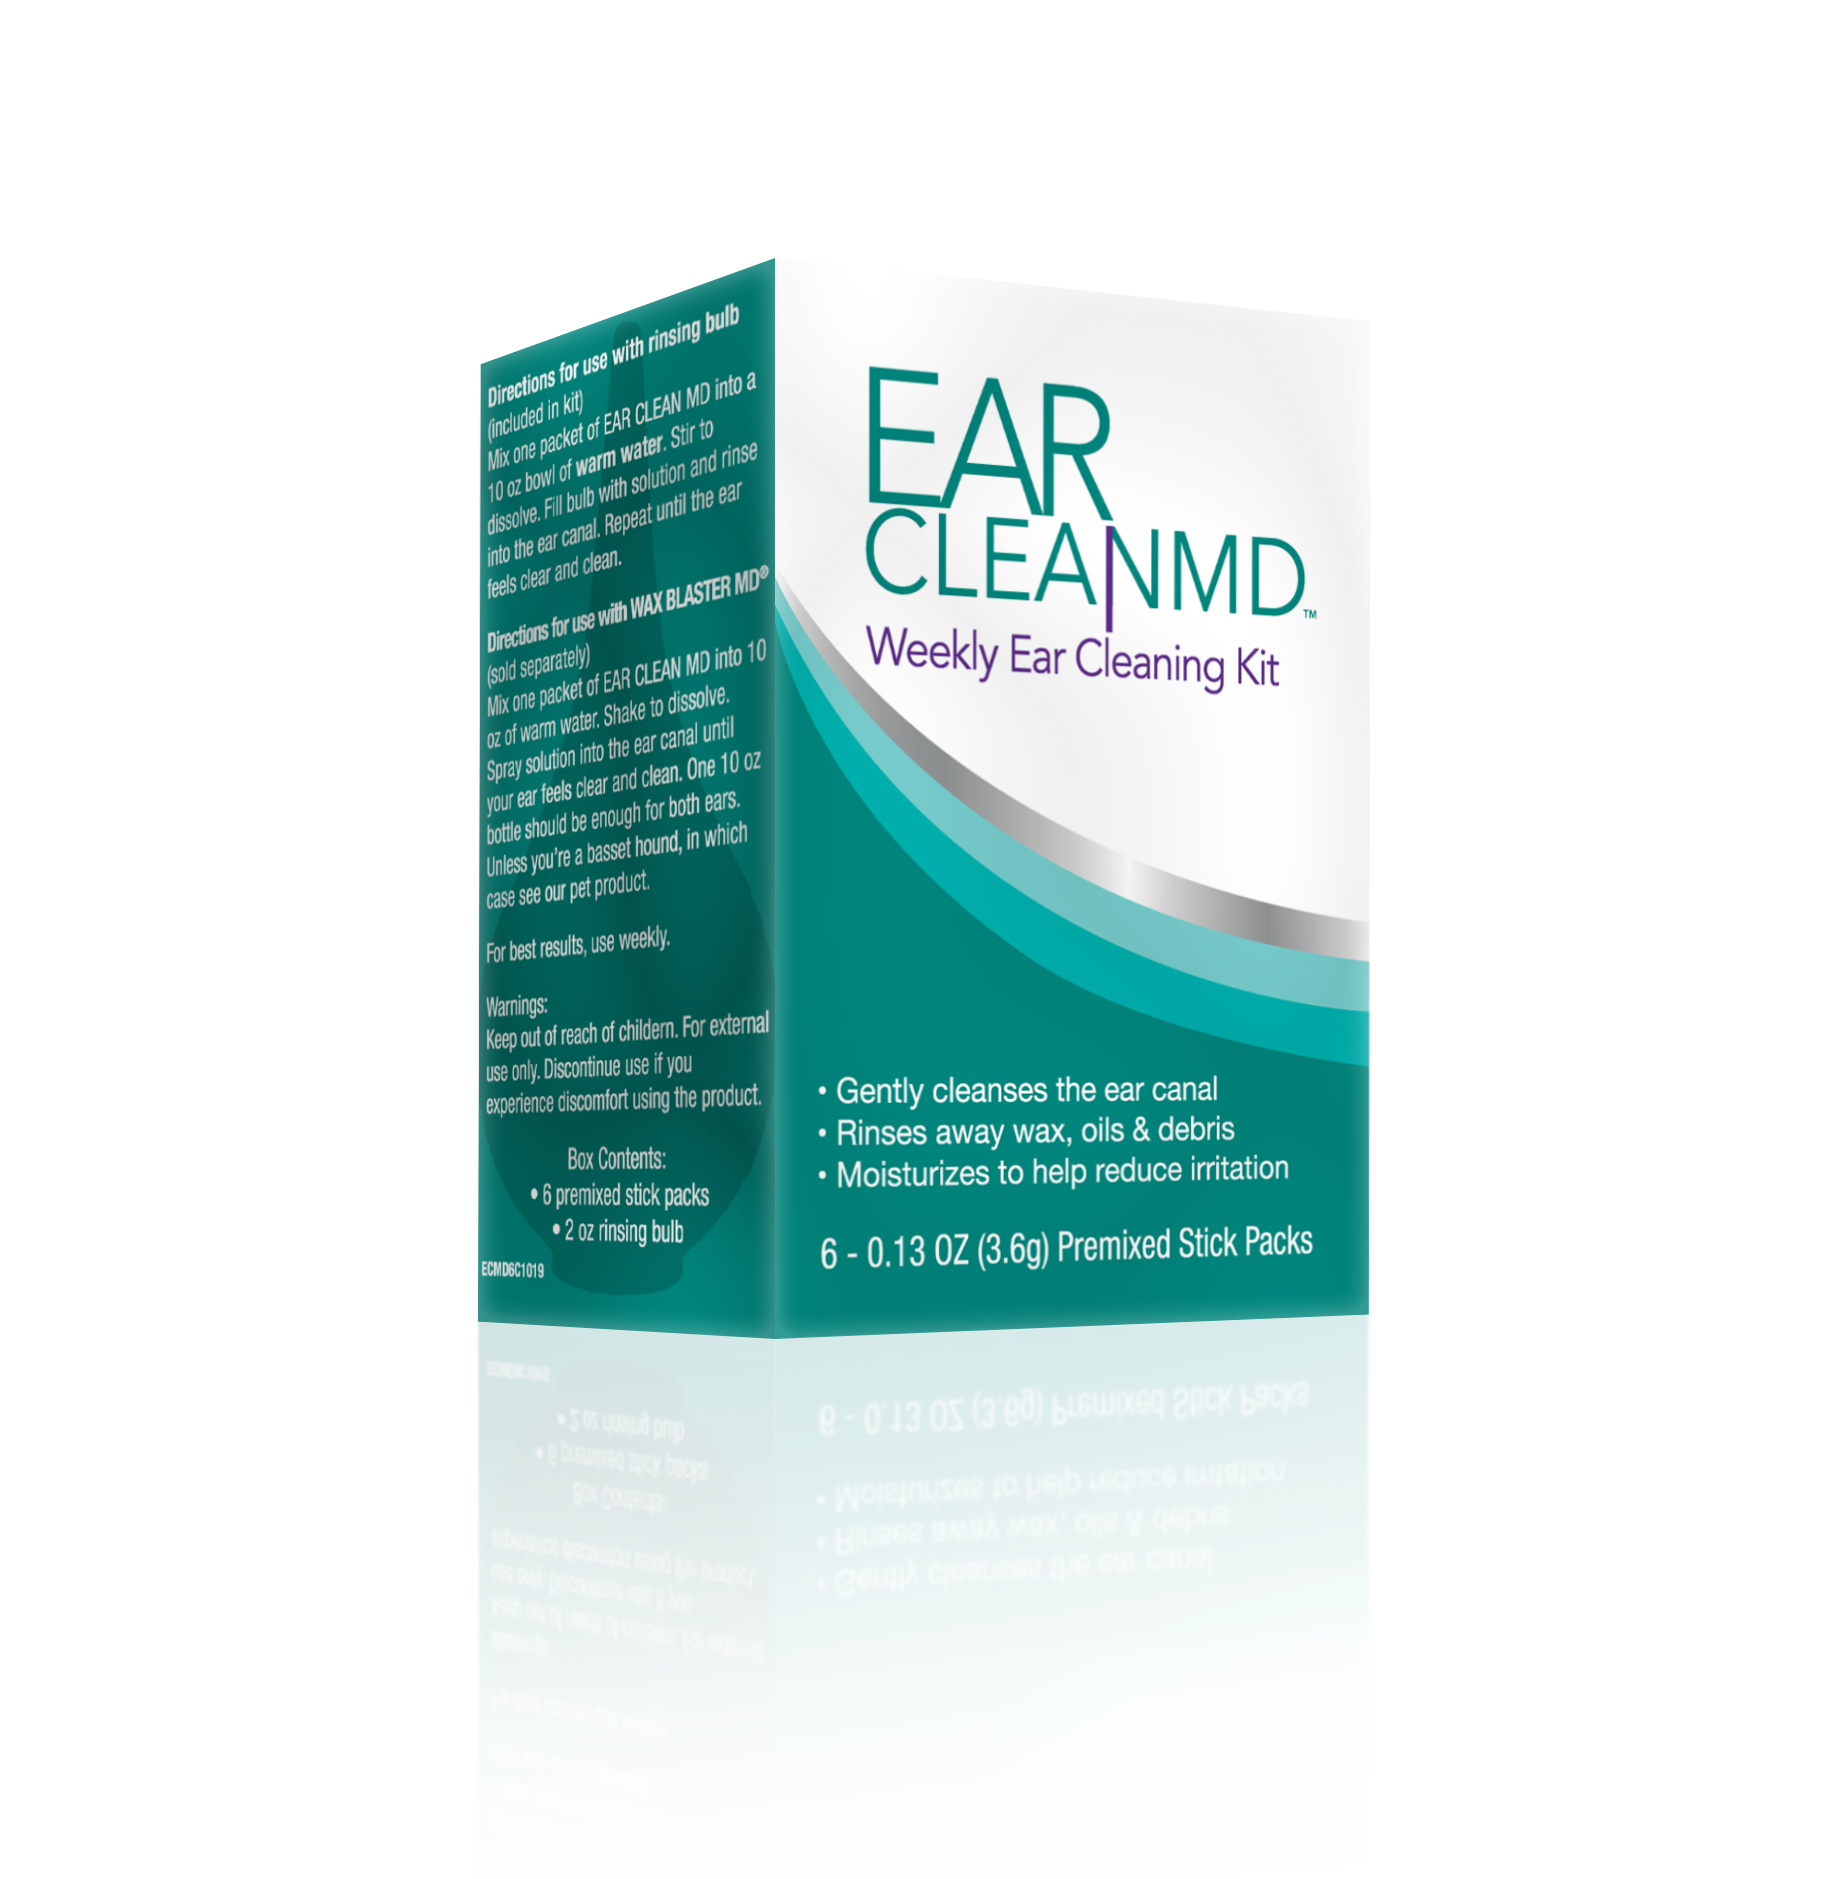 EAR CLEAN MD - Weekly Ear Cleaning Kit